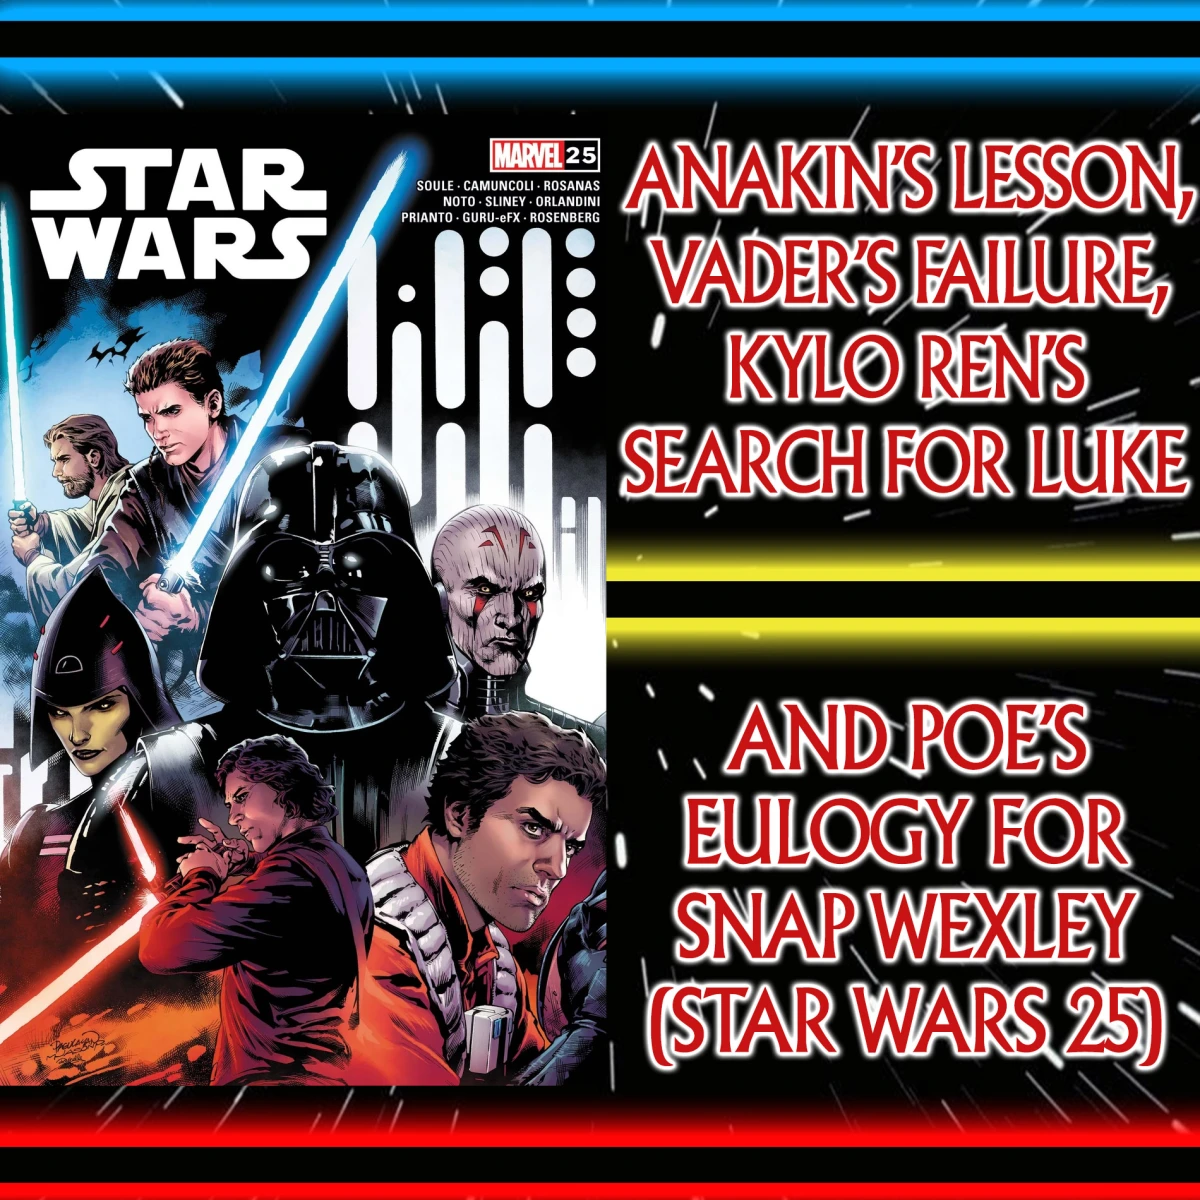 Star Wars 25: Anakin’s Lesson, Vader’s Failure, Kylo Ren’s Search For Luke & Poe’s Eulogy For Snap Wexley – Charles Soule’s 100th Comic (Star Wars #25) Ep 116